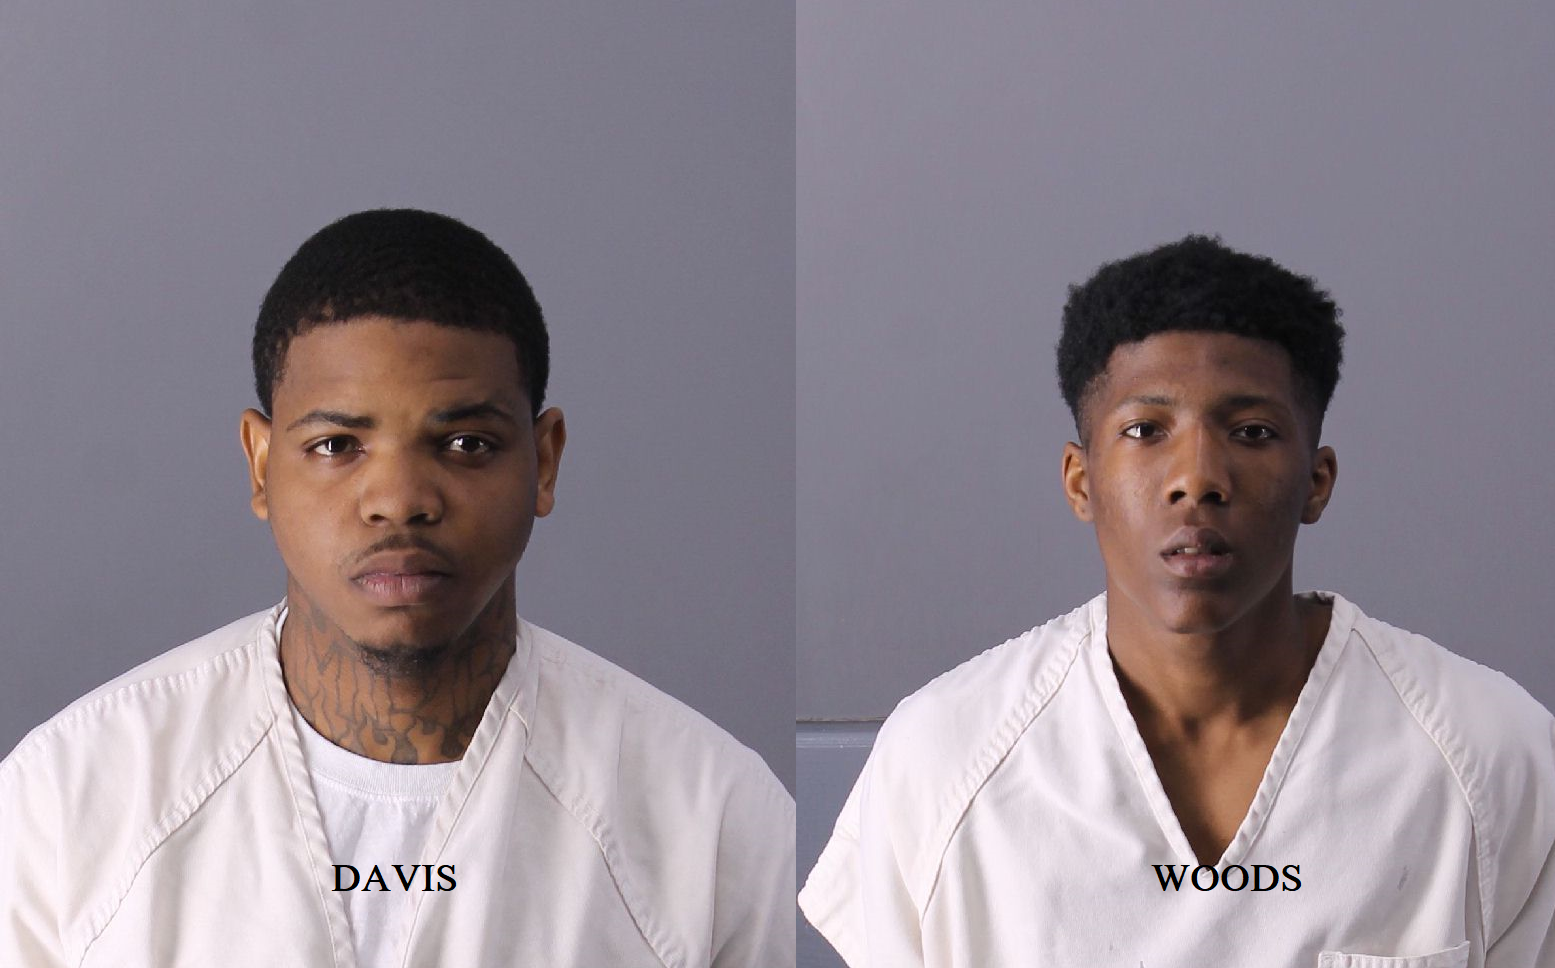 2 arrested in connection to deadly double shooting in Birmingham